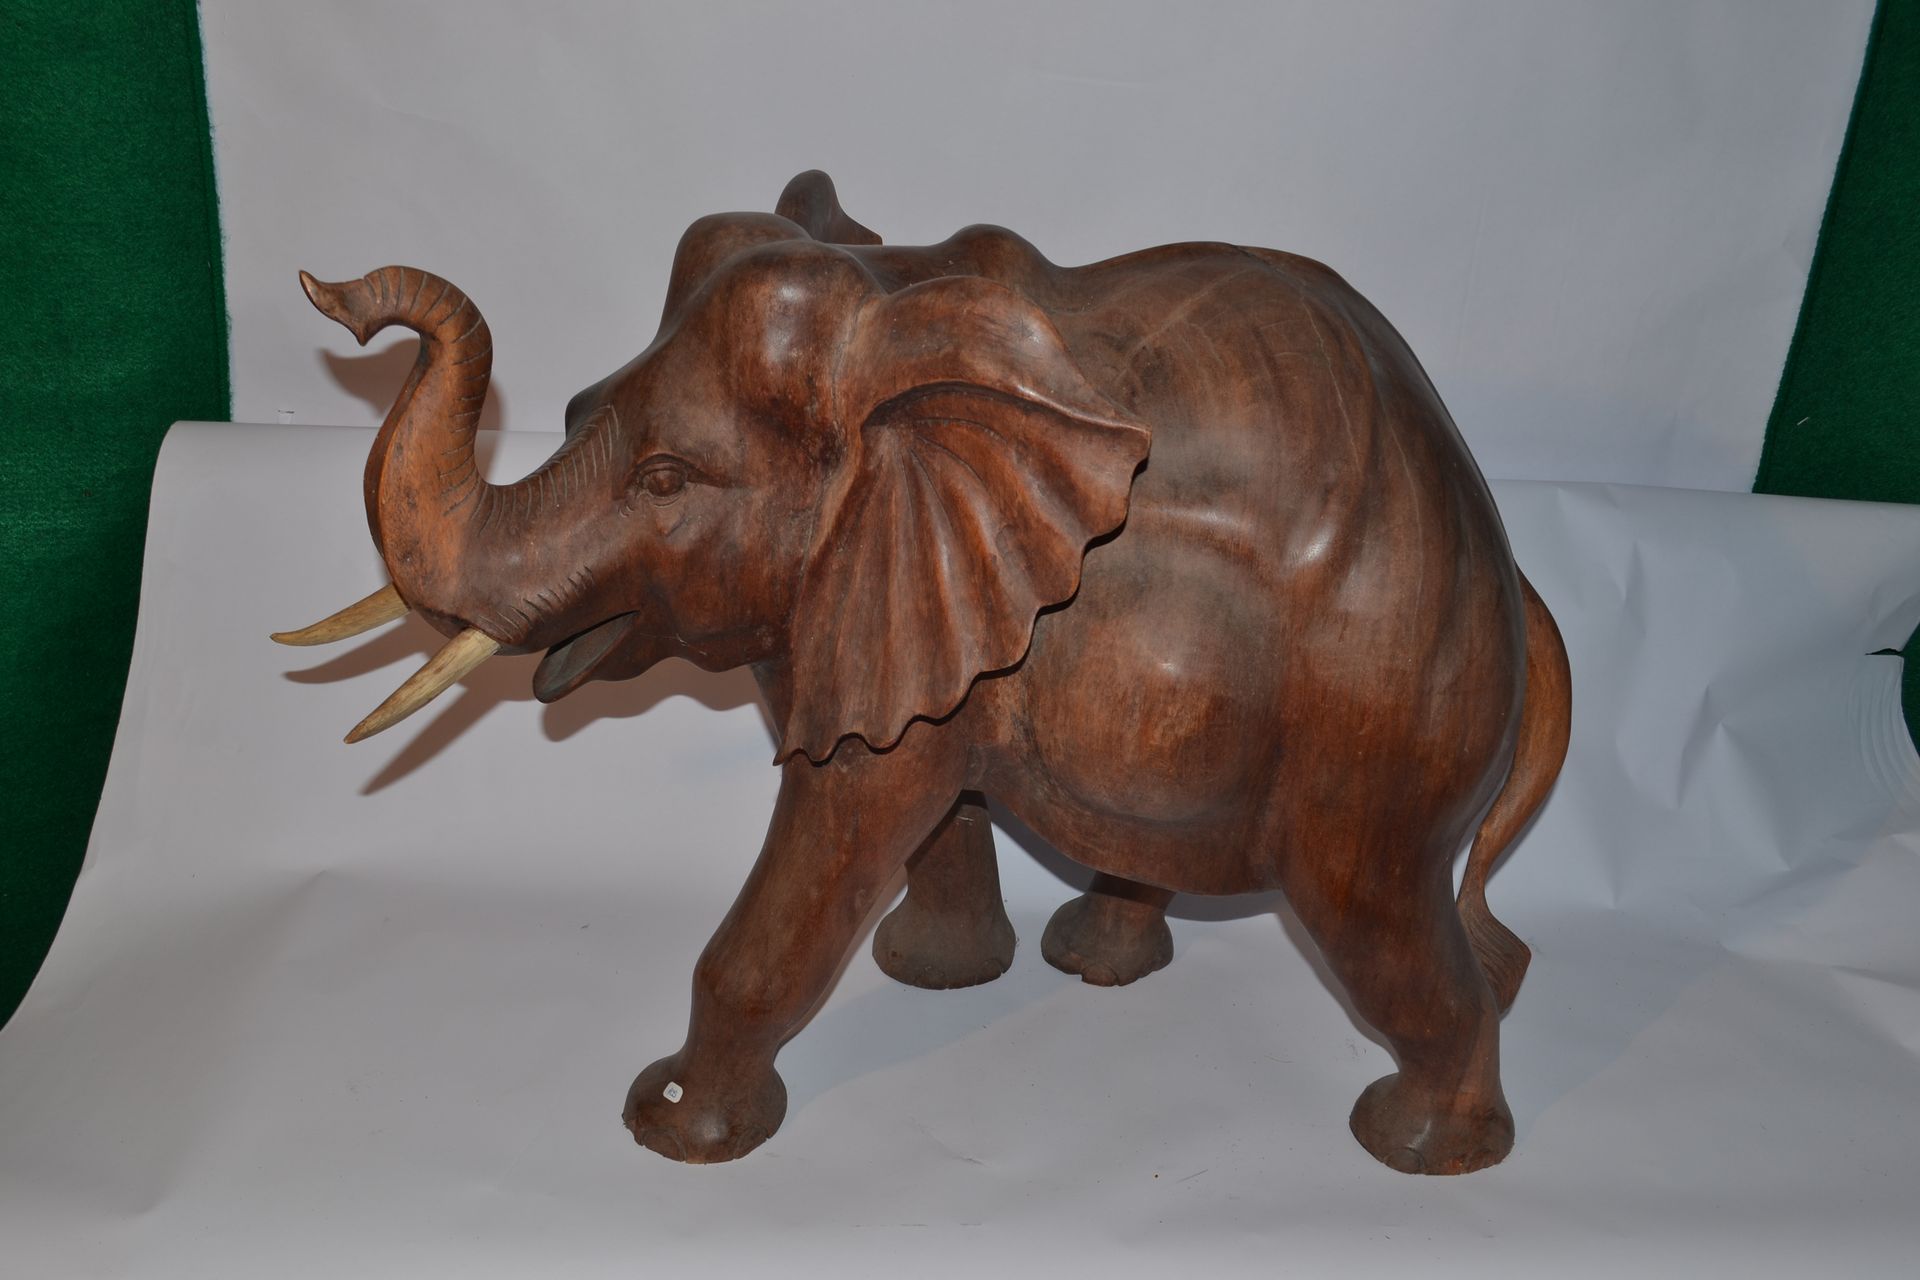 Null Carved elephant

Suar wood 

50 x 70 x 38 cm

weight : 18 Kg.